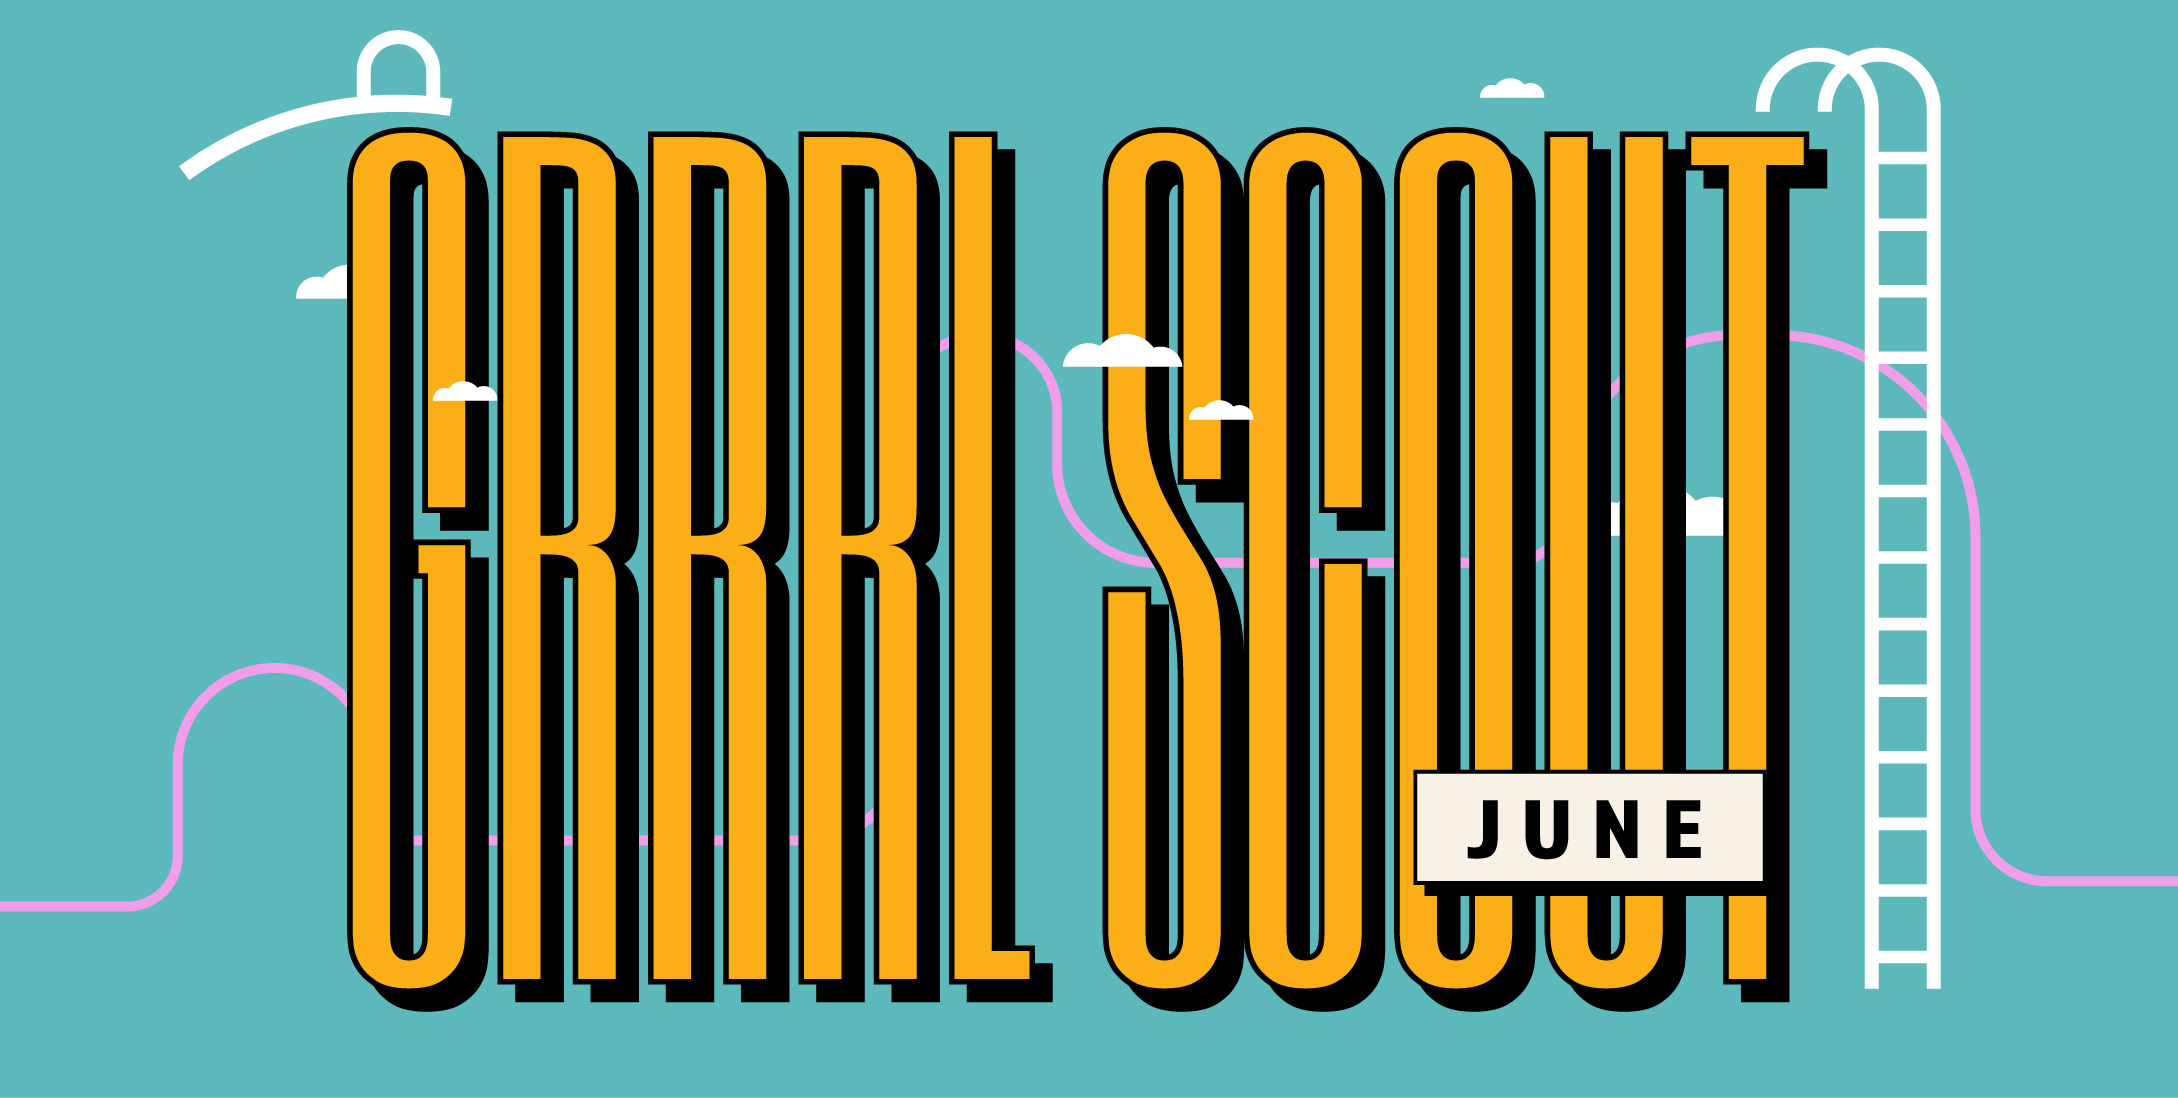 GRRRL SCOUT JUNE QUEER DANCE PARTY featuring DJ K. Reeves with with special guest Dj Mommy Long Legs Saturday, June 11 The Hook's Theater/Mission Room/UTC Patio Doors 9:30pm :: Music 9:30pm :: 21+ $10 EARLY / $14 ADV / $20 DOS